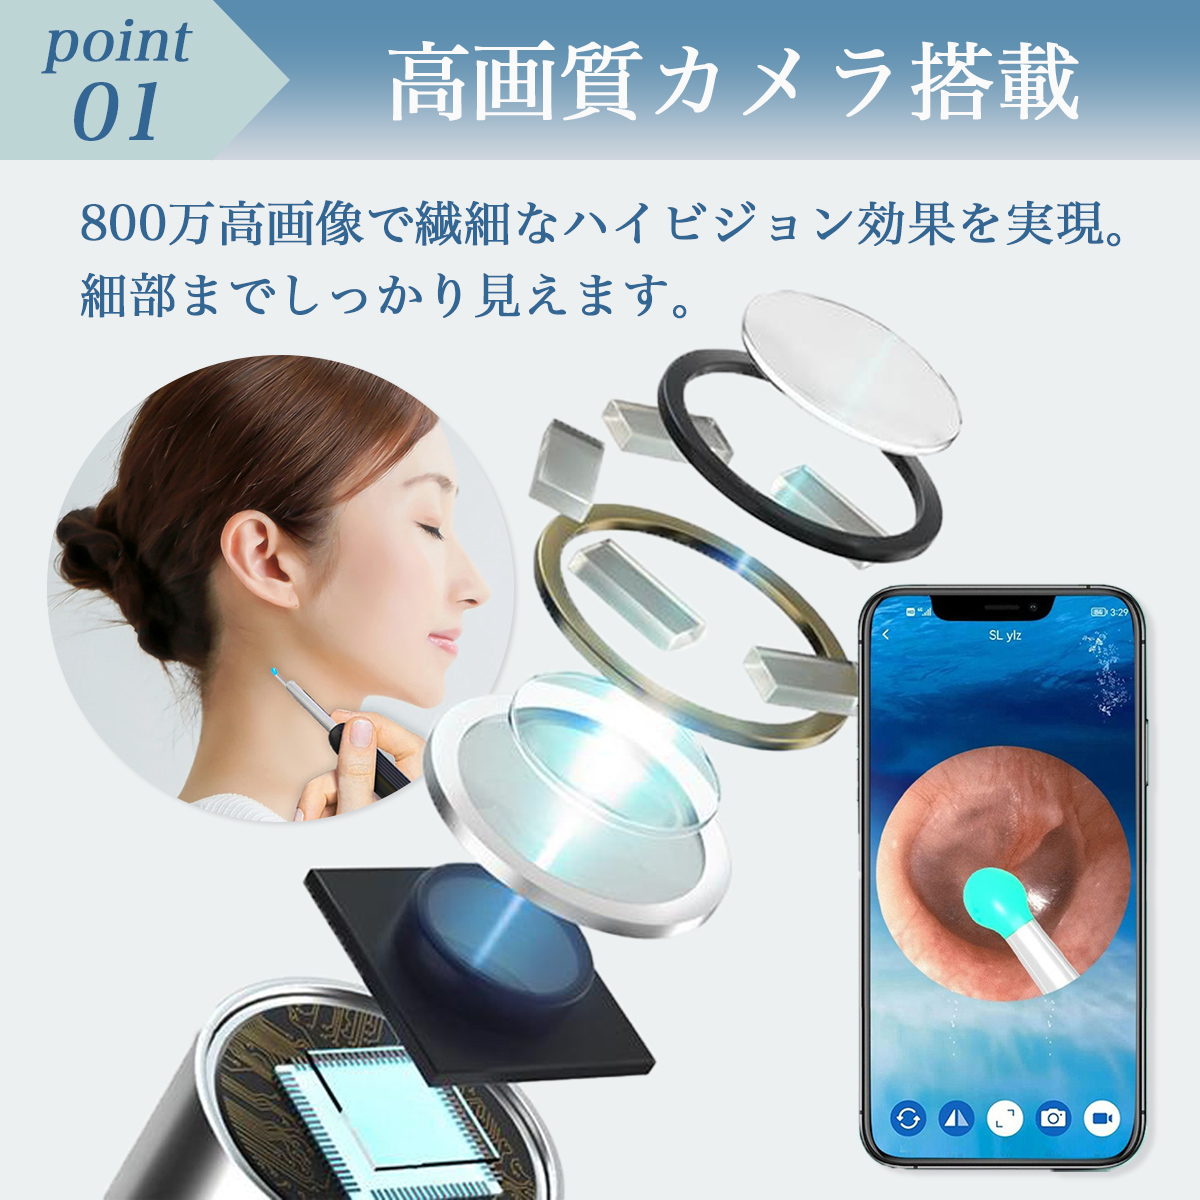  ear .. camera camera attaching iphone correspondence Android 800 ten thousand pixels temperature control rechargeable year scope light LED light ear ... year .. child 